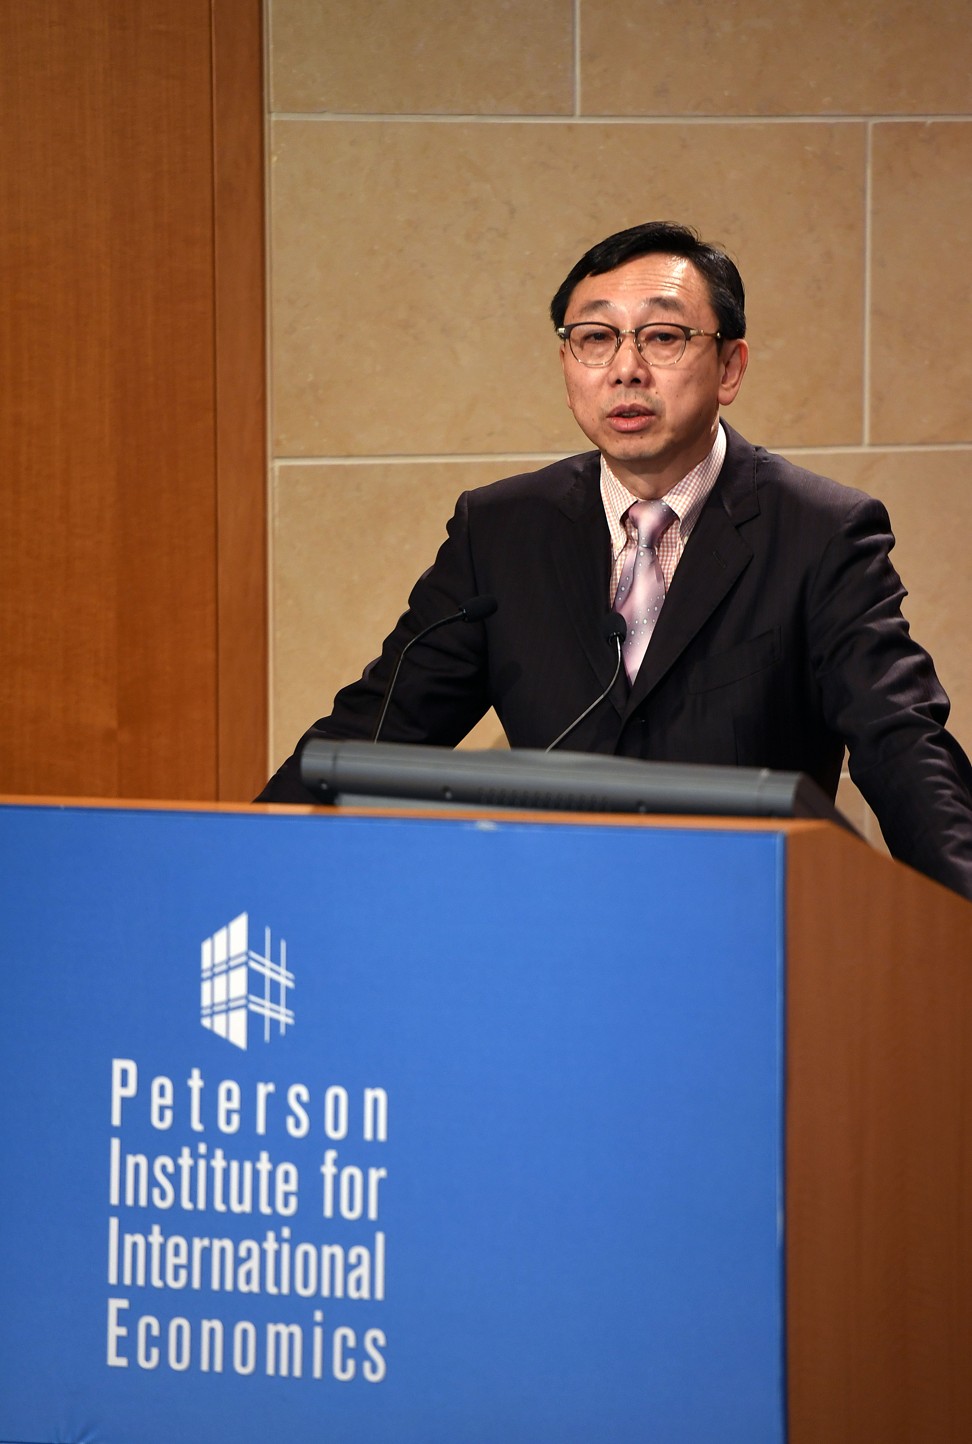 Zhang Tao speaking at the Peterson Institute for International Economics in Washington D.C. on Oct. 5, 2016 while he was deputy managing director of the International Monetary Fund (IMF). Photo: Xinhua